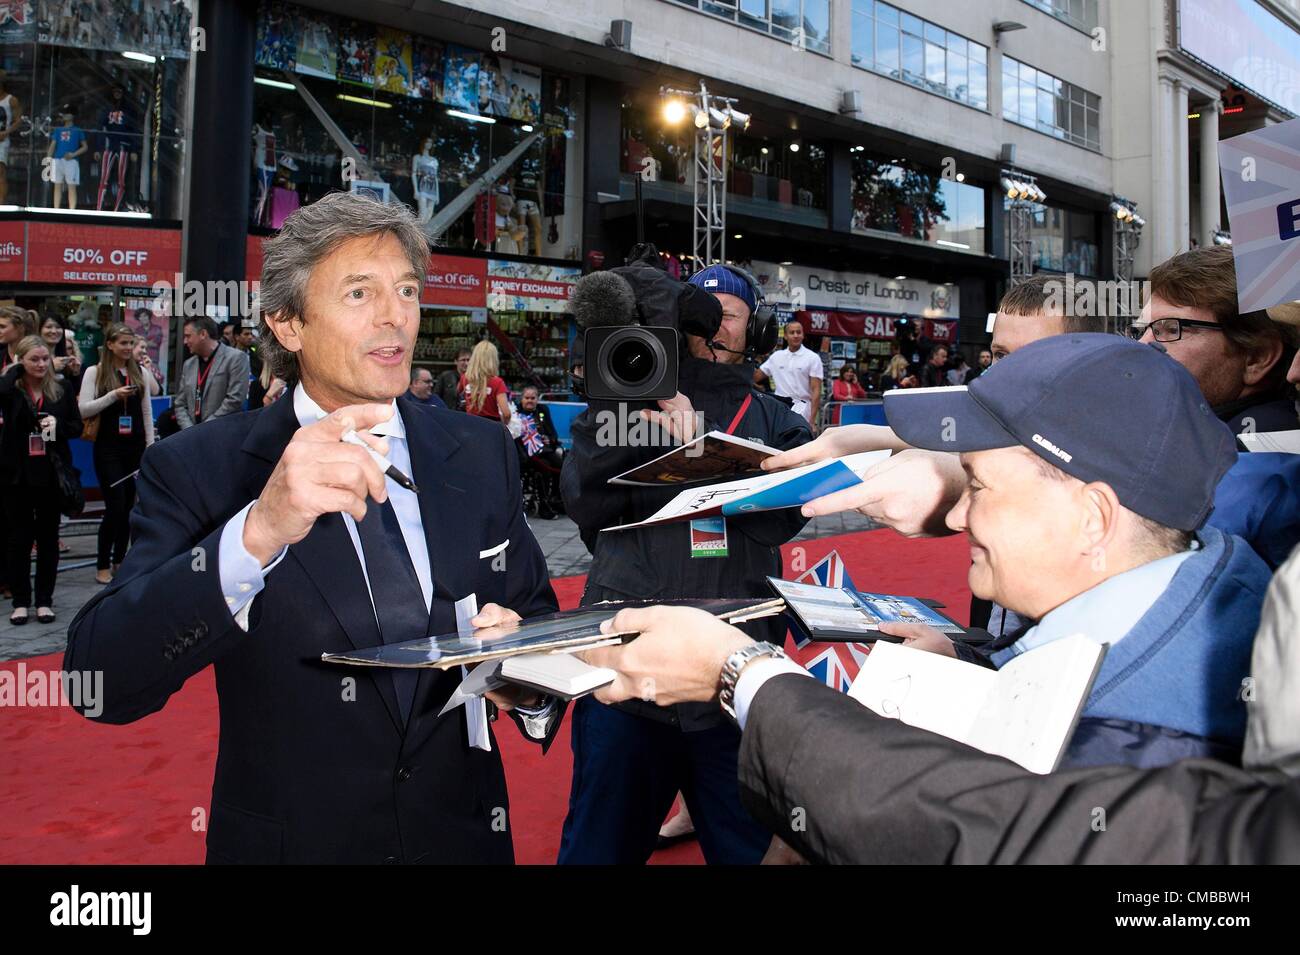 Nigel Havers attends the Great British Premiere of Chariots of Fire on 10/07/2012 at The Empire, Leicester Square, London. Based on a true story, Chariots of Fire was the winner of four Academy Awards®, including Best Picture and Best Original Screenplay.. Persons pictured: Nigel Havers. Picture by Julie Edwards Stock Photo